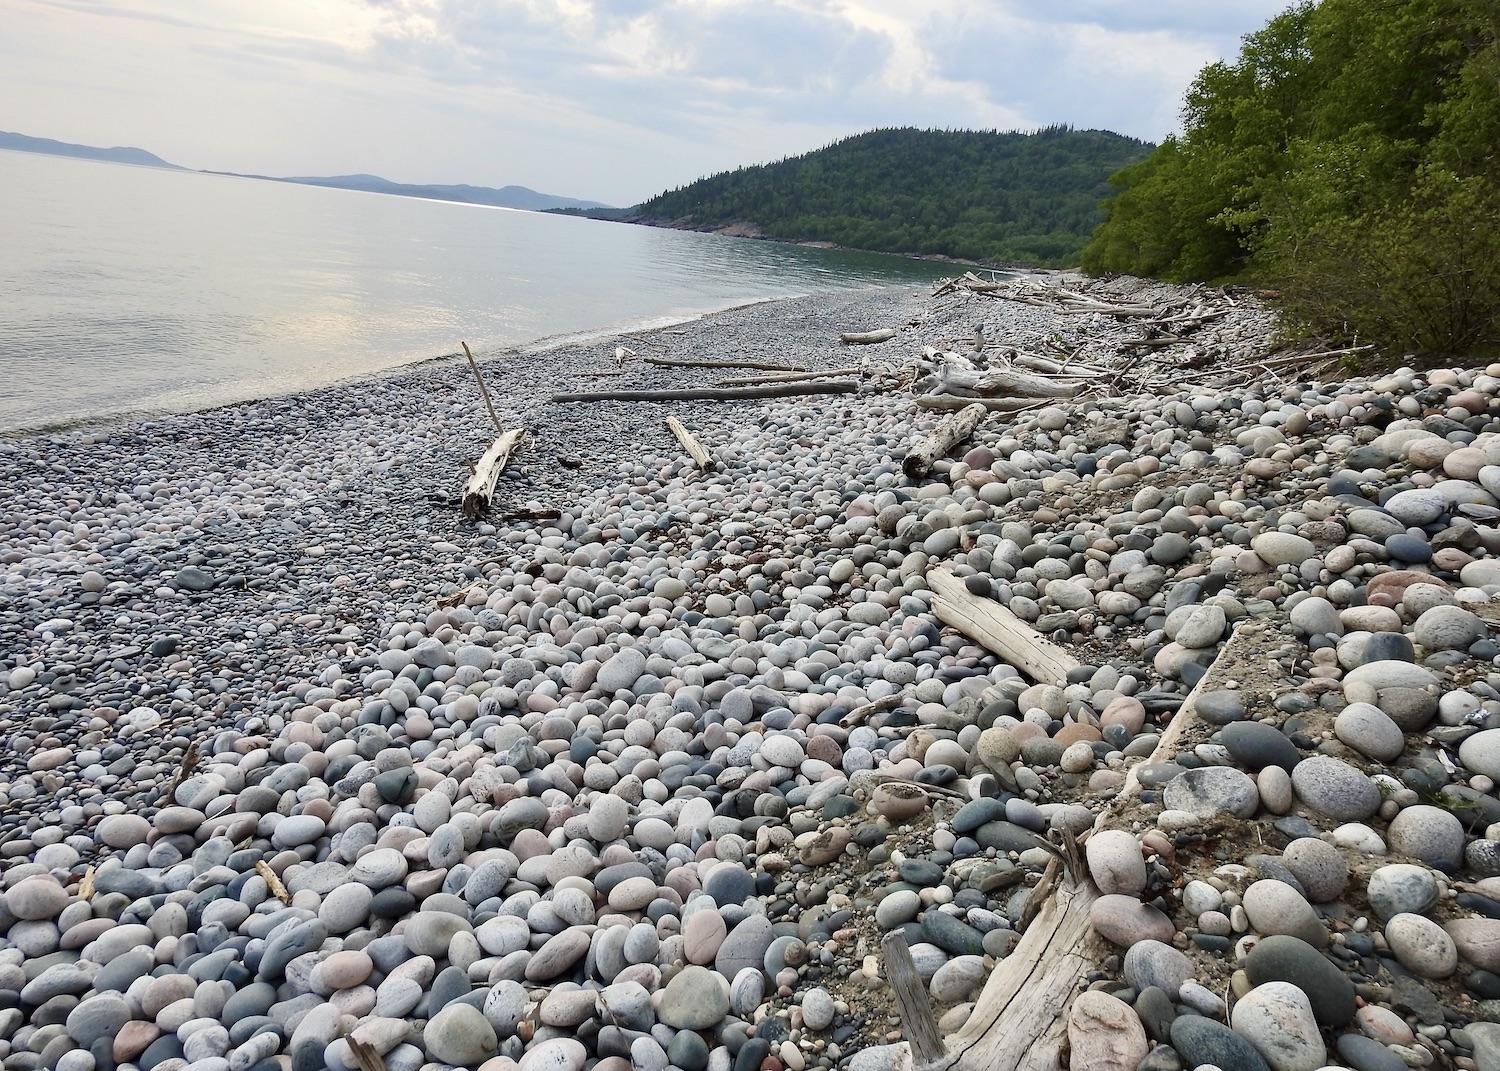 People are drawn to Pebble Beach at Marathon to see rocks, pebbles and driftwood that have been smoothed by pounding waves from Lake Superior.